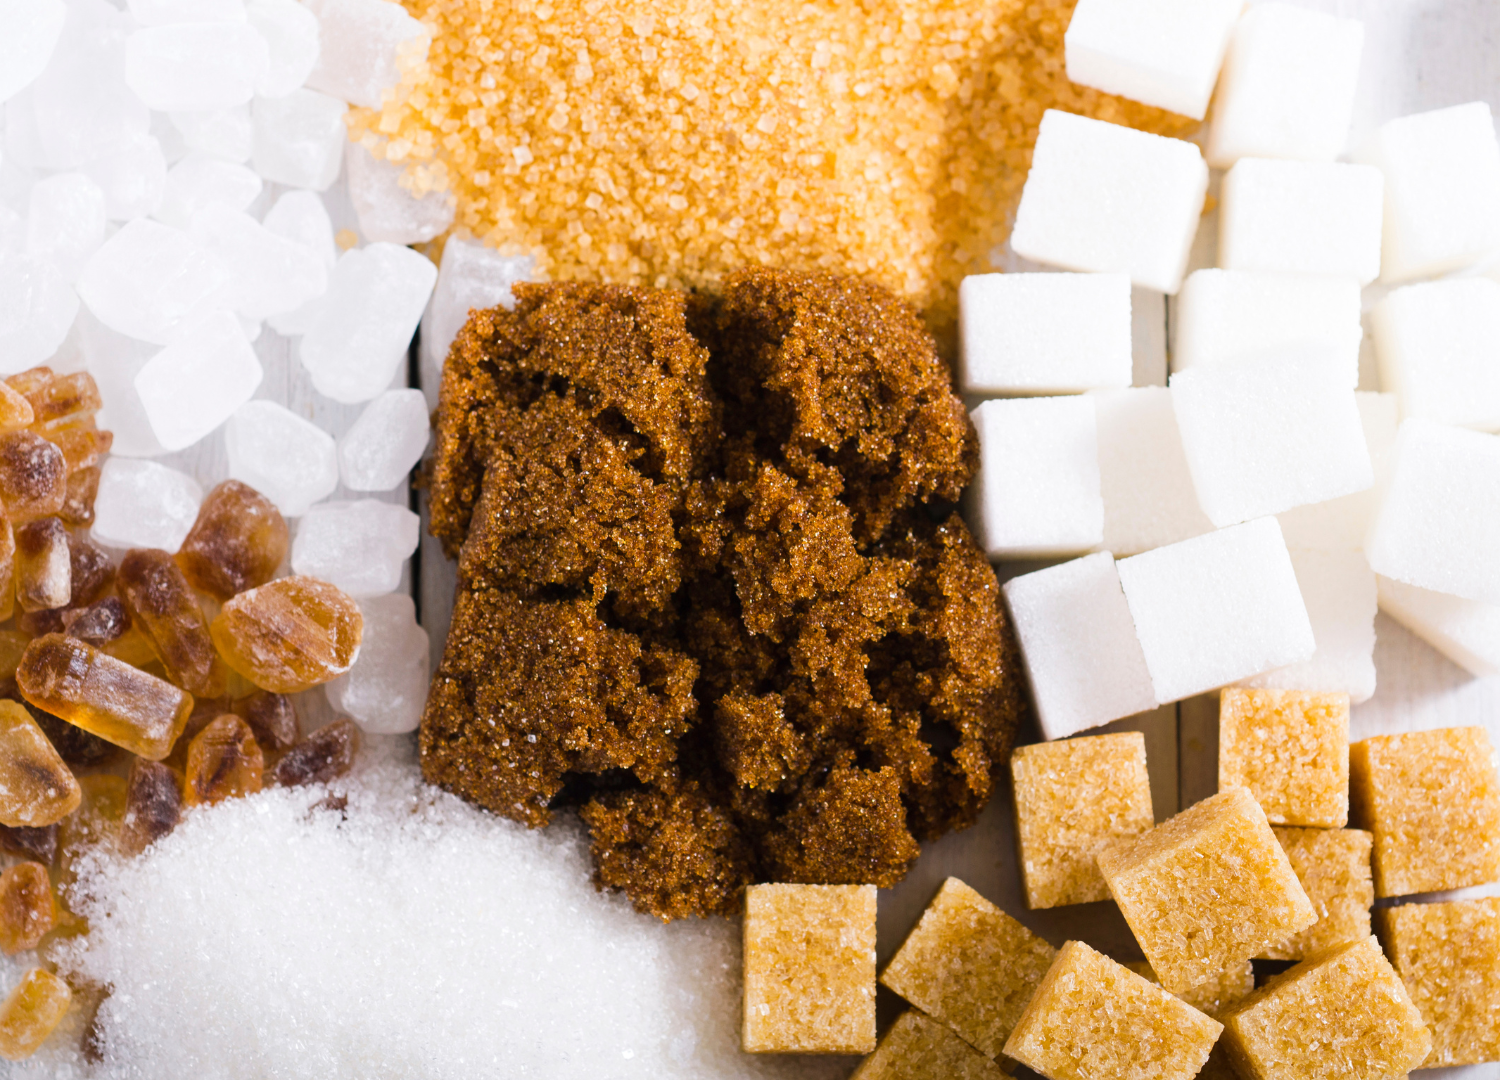 7 Reasons to Cut Sugar Out of Your Diet